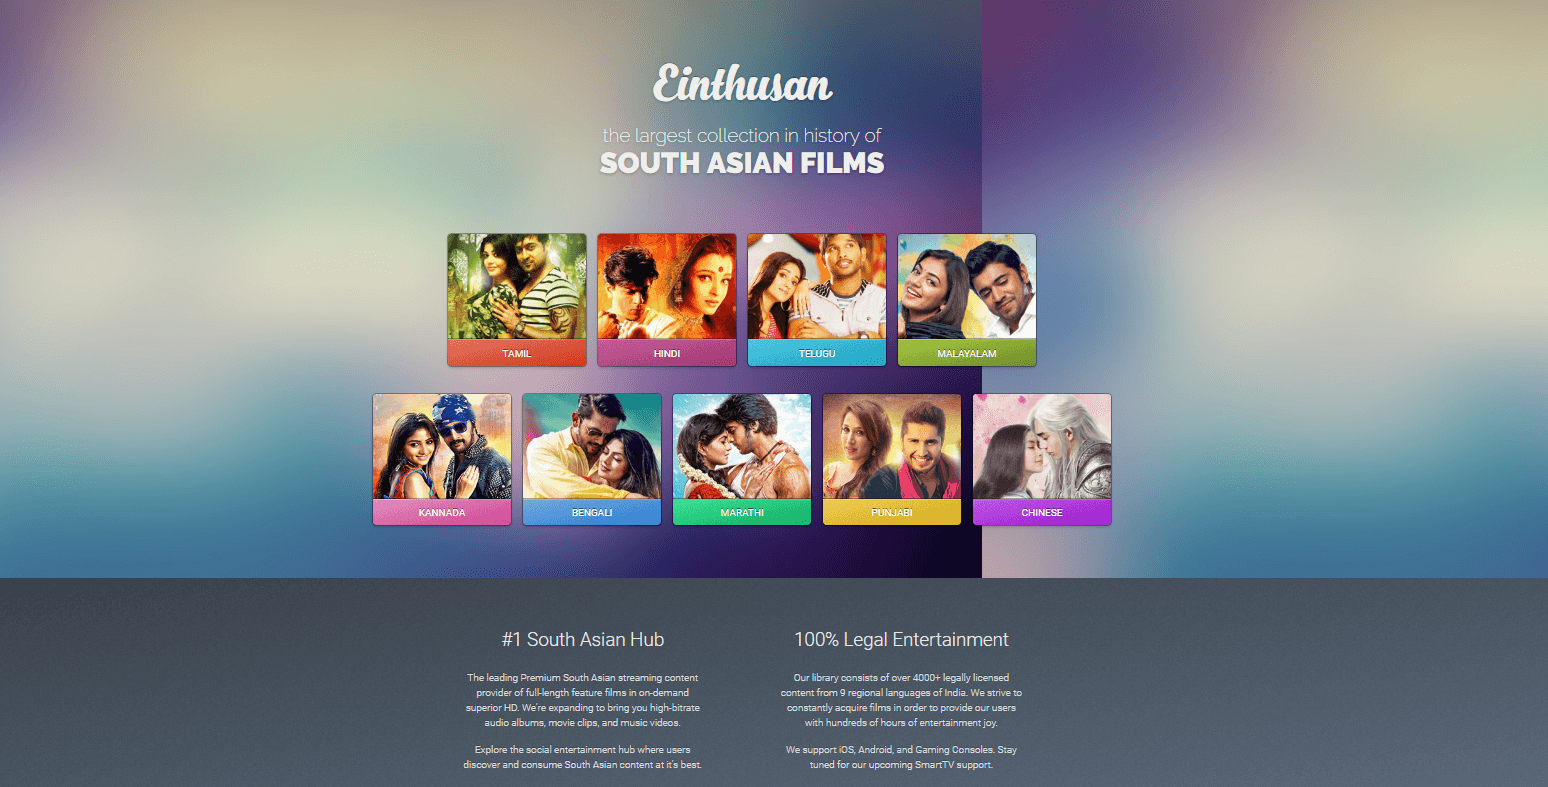 Einthusan Movies Download 2019 Watch Online Tamil Telugu Hindi Malayalam News Bugz Free and fast einthusan downloader is a simple web service to download videos and audios from einthusan and convert to mp4, mp3 at best quality. einthusan movies download 2019 watch